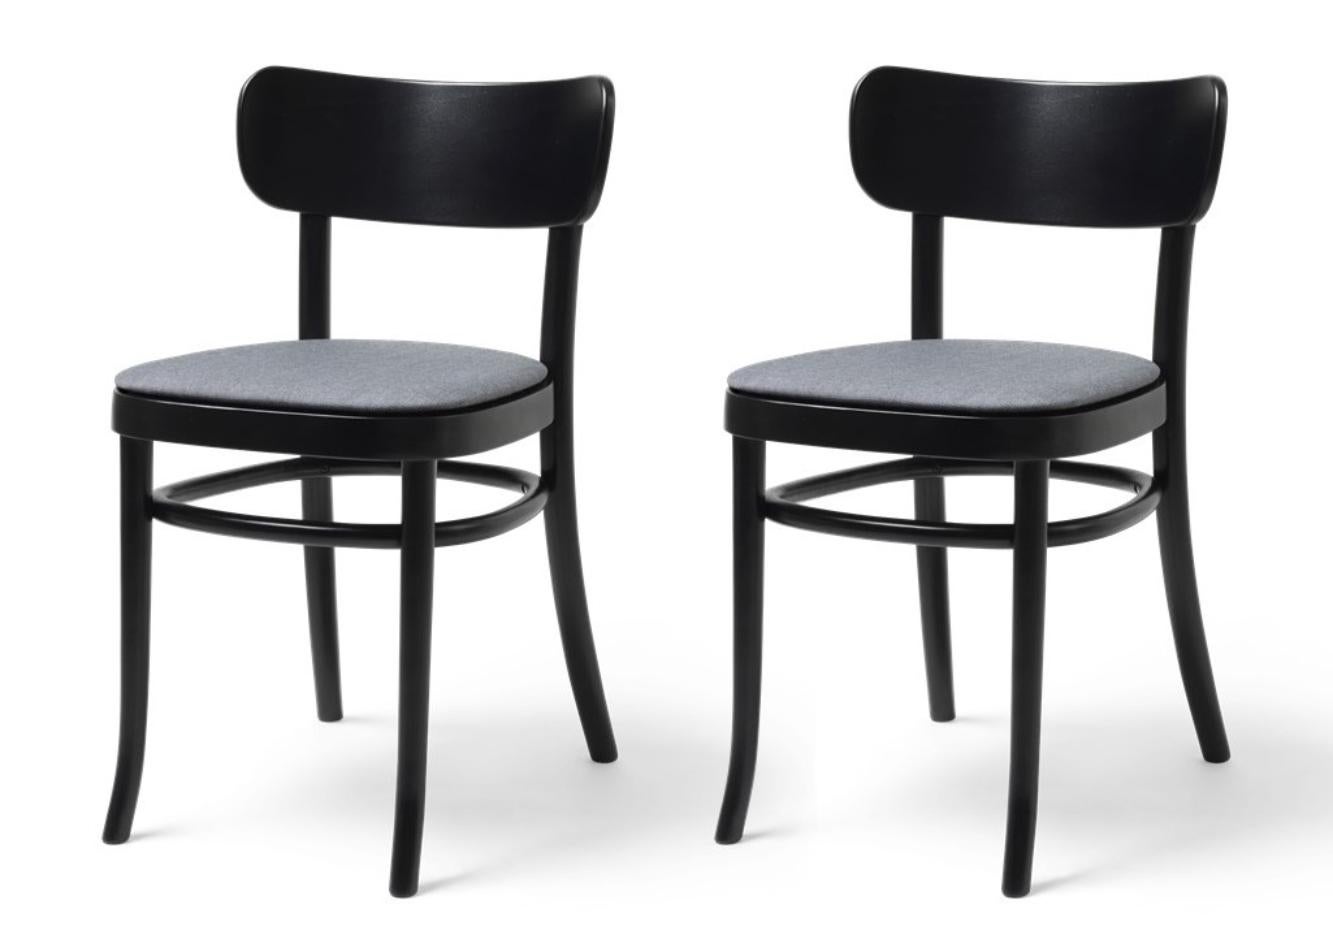 Set of 2 MZO chairs by Mazo Design
Dimensions: W 46 x D 50 x H 75 cm
Materials: Beech.

This iconic chair played a leading role in one of the fairy tales of Danish furniture design. However – more curiously – it is also on display at The Workers